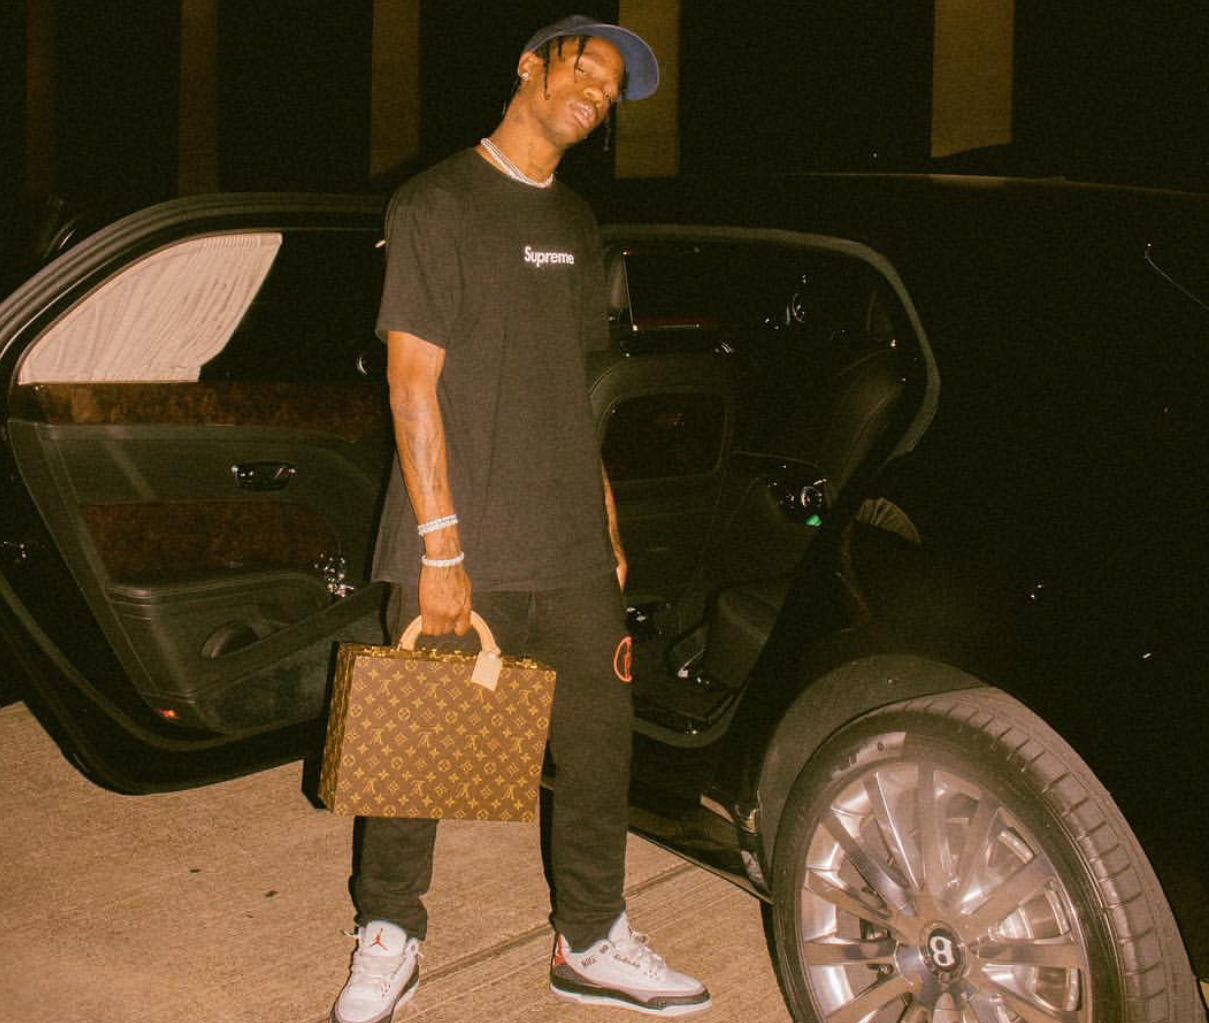 SPOTTED: Travis Scott Carries LV Briefcase while in Supreme & Jordan 3’s